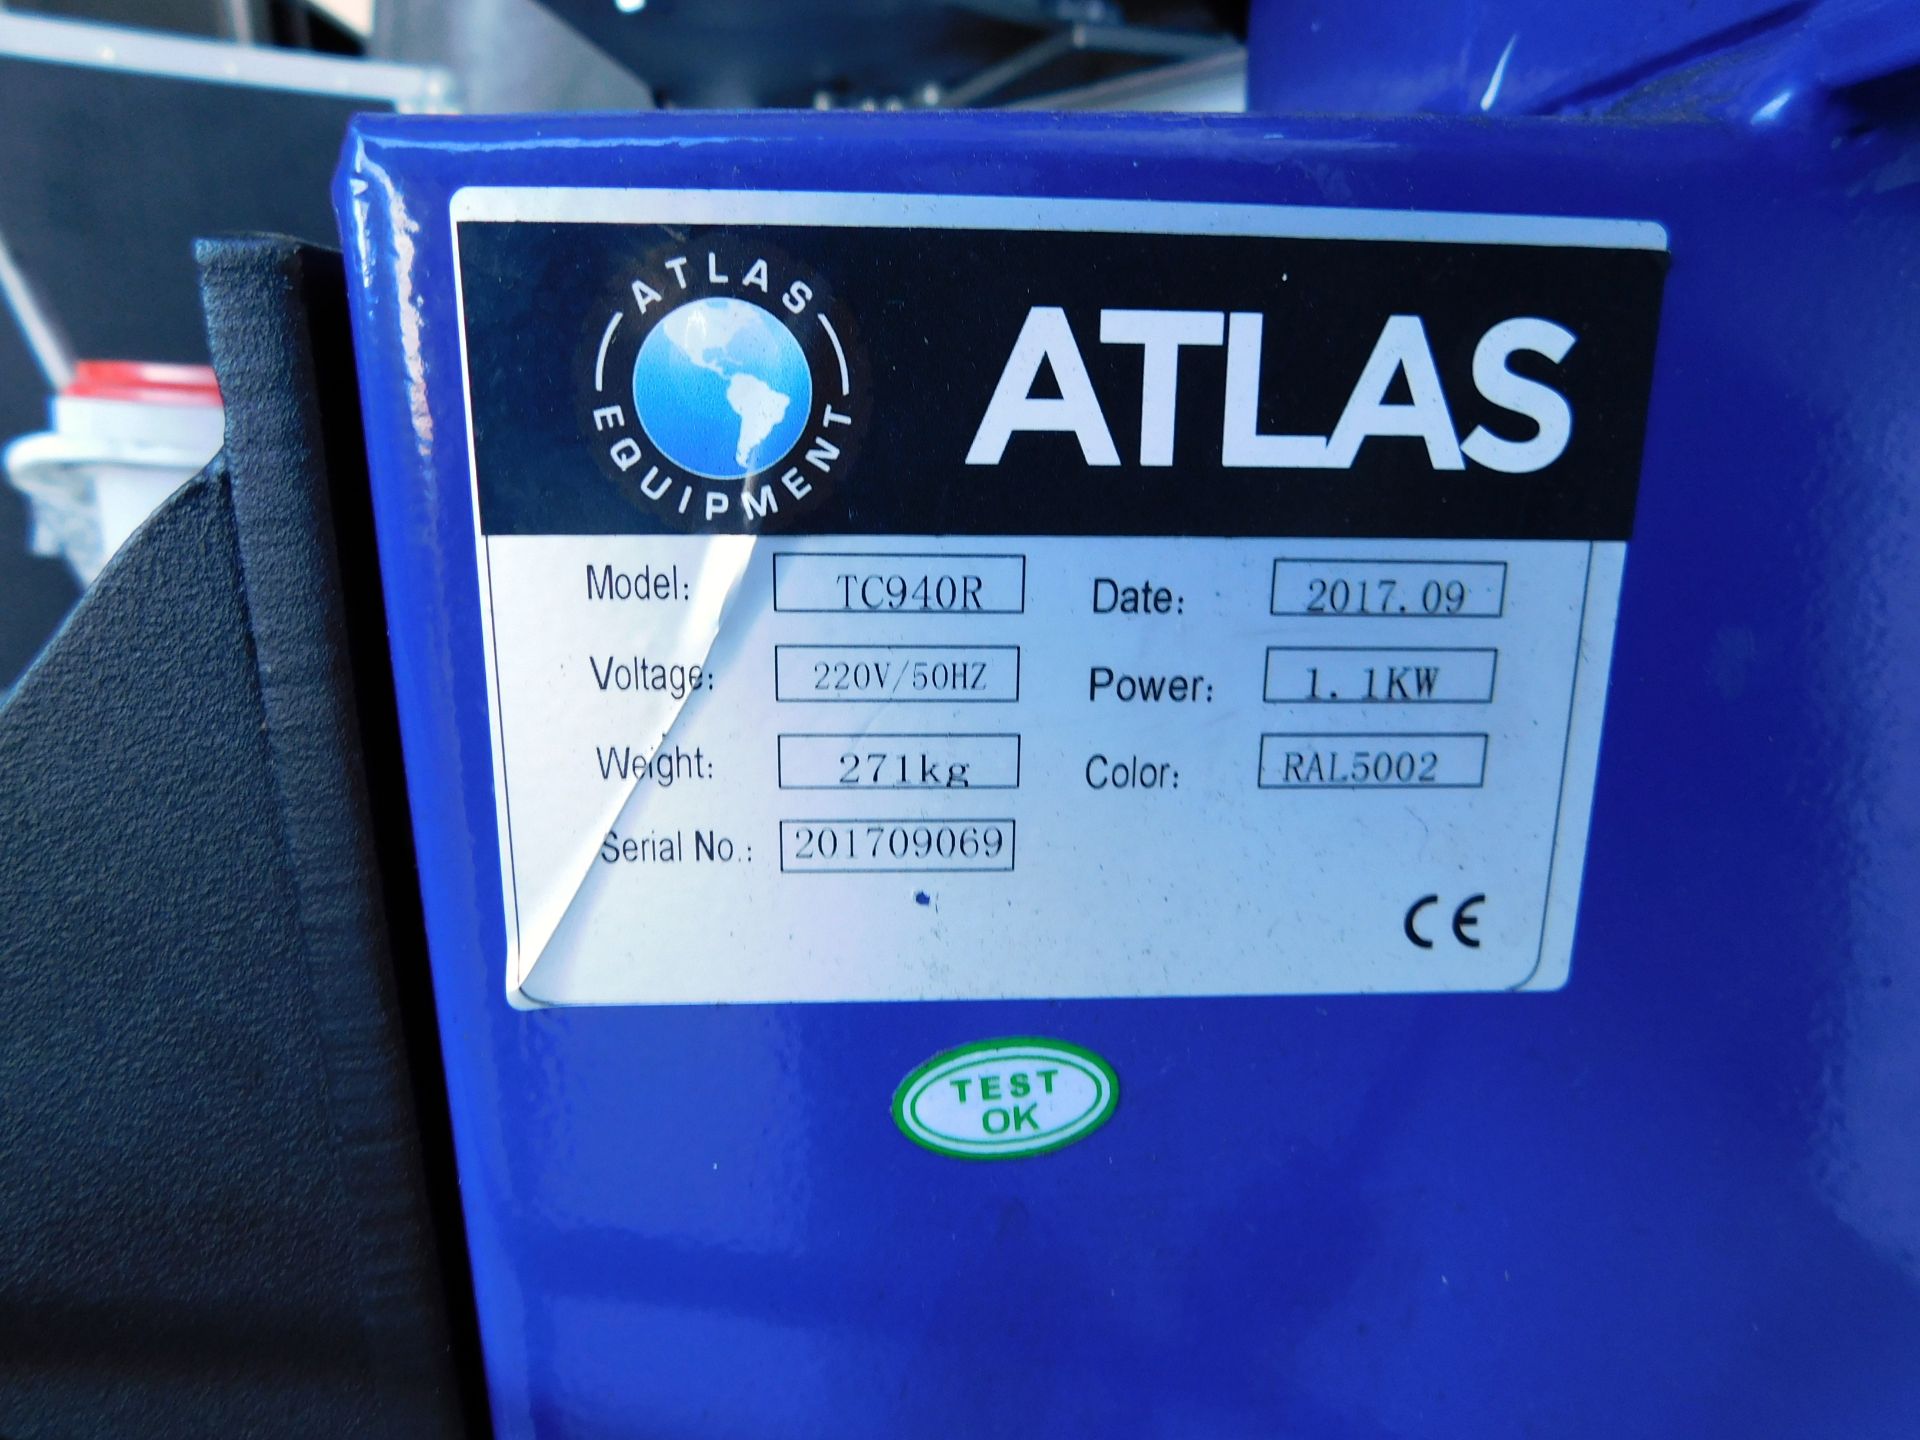 Atlas TC940R Automatic tyre changing machine (2017) Serial Number: 201709069 - Image 3 of 3